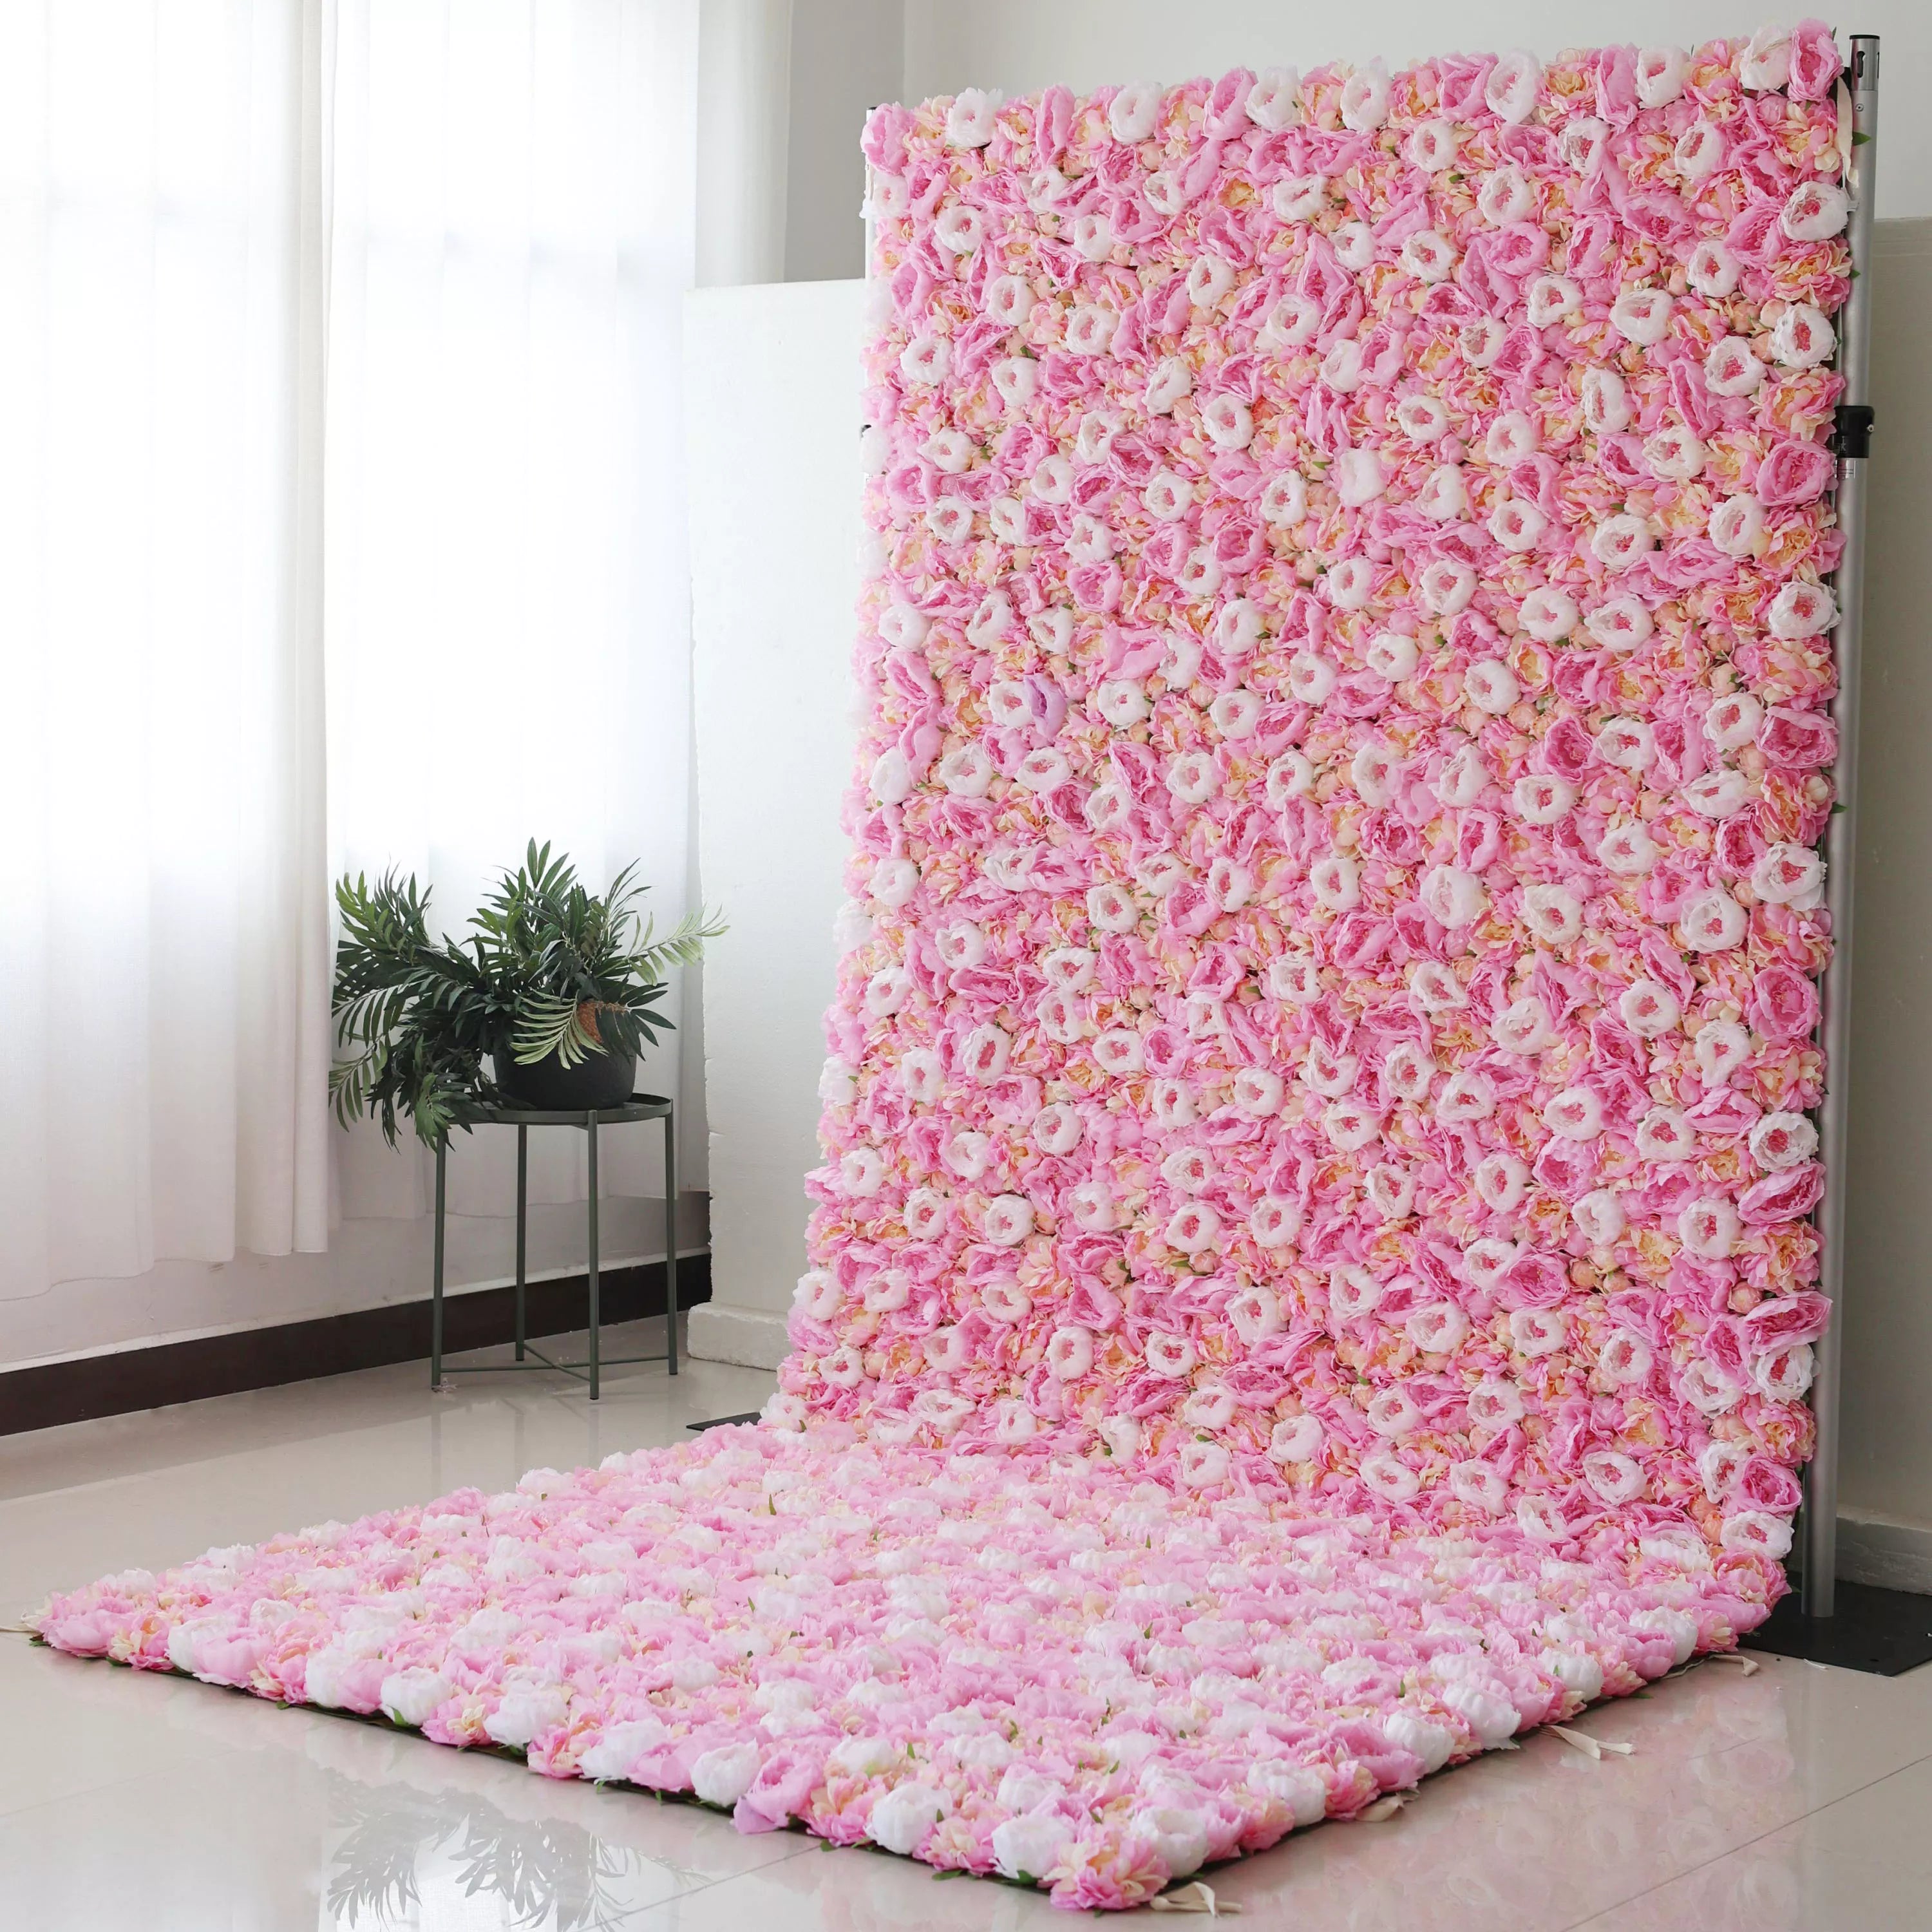 ValarFlowers Backdrop: A sea of soft pink petals, capturing the tenderness of nature. Ideal for adding a touch of elegance and warmth to any event.